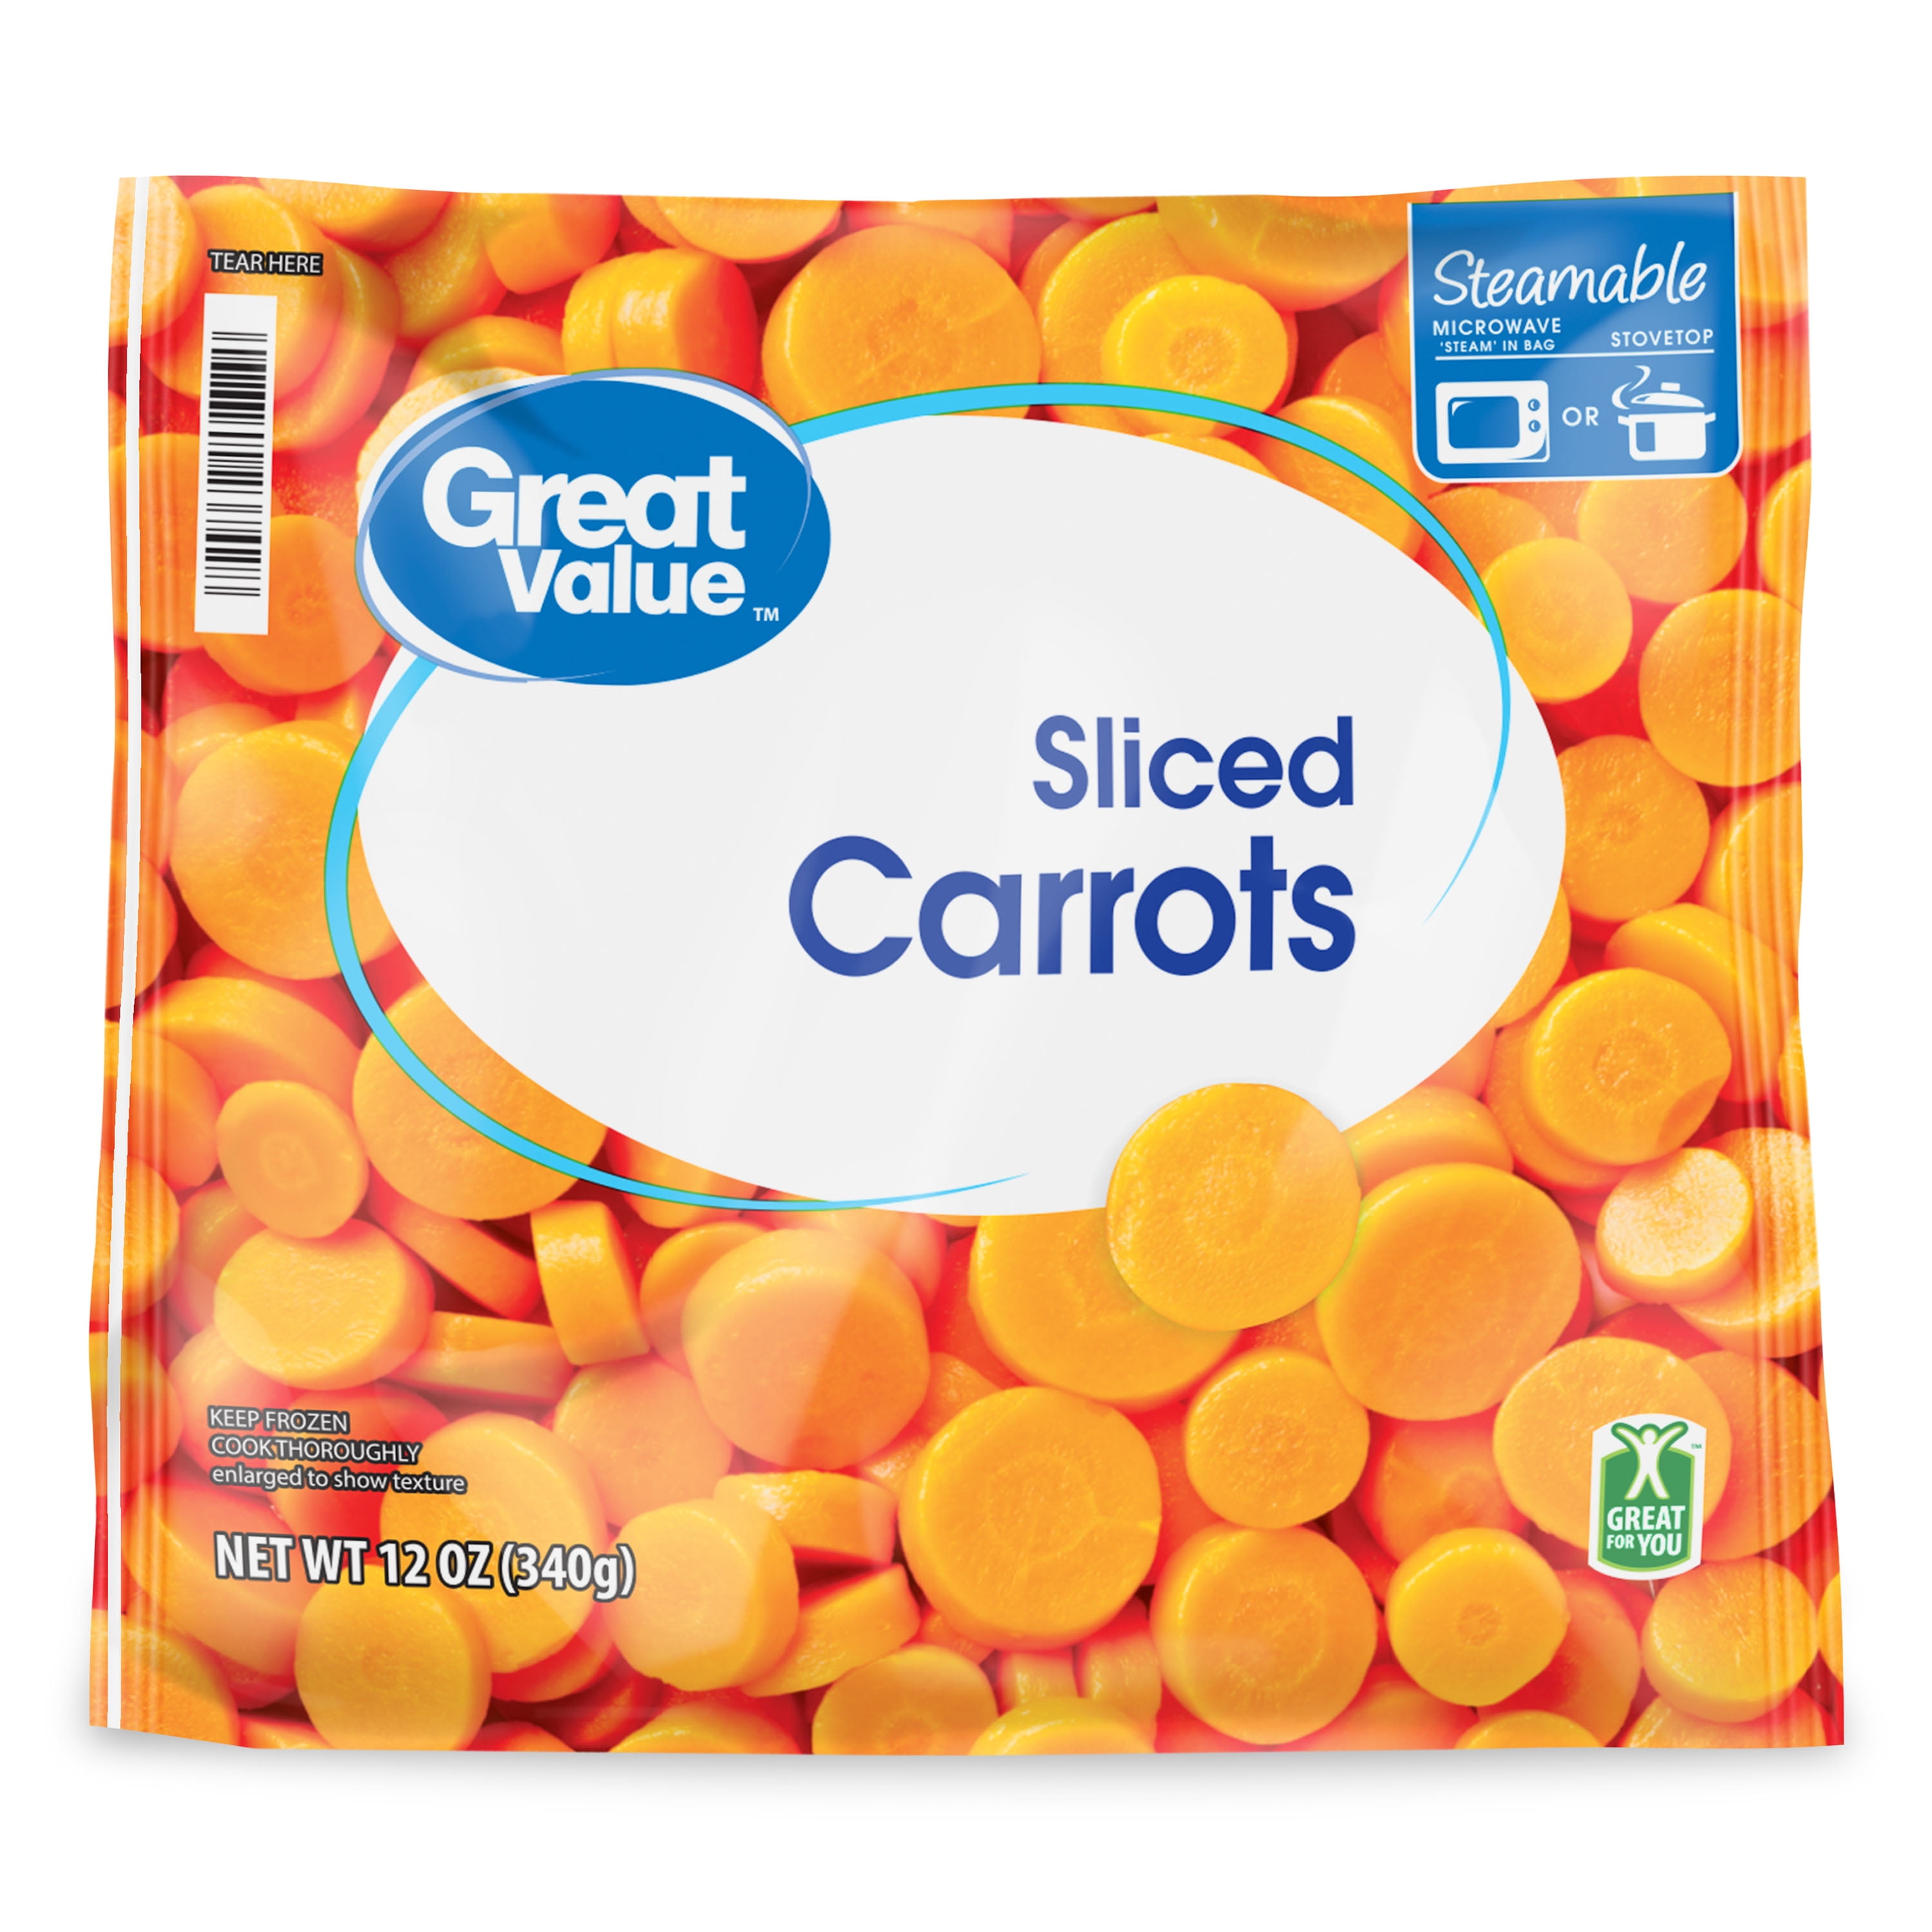 Great Value Steamable Sliced Carrots, Frozen, 12 oz